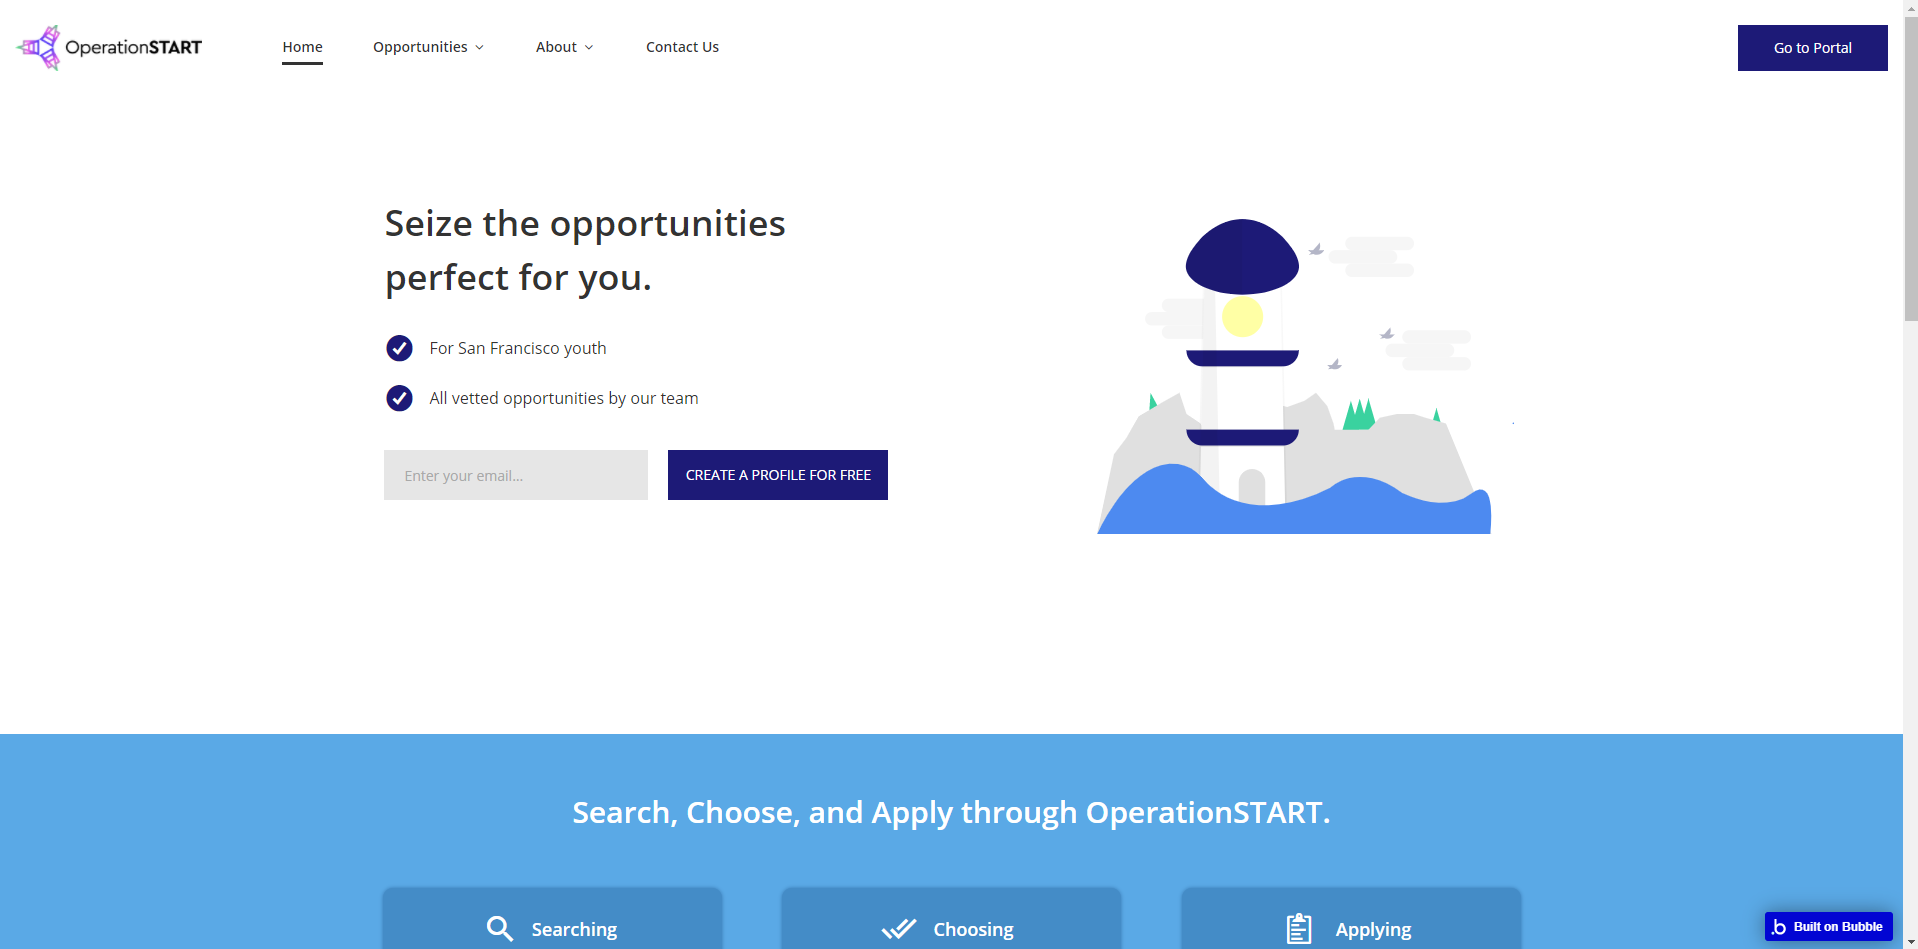 The homepage of the OperationSTART platform